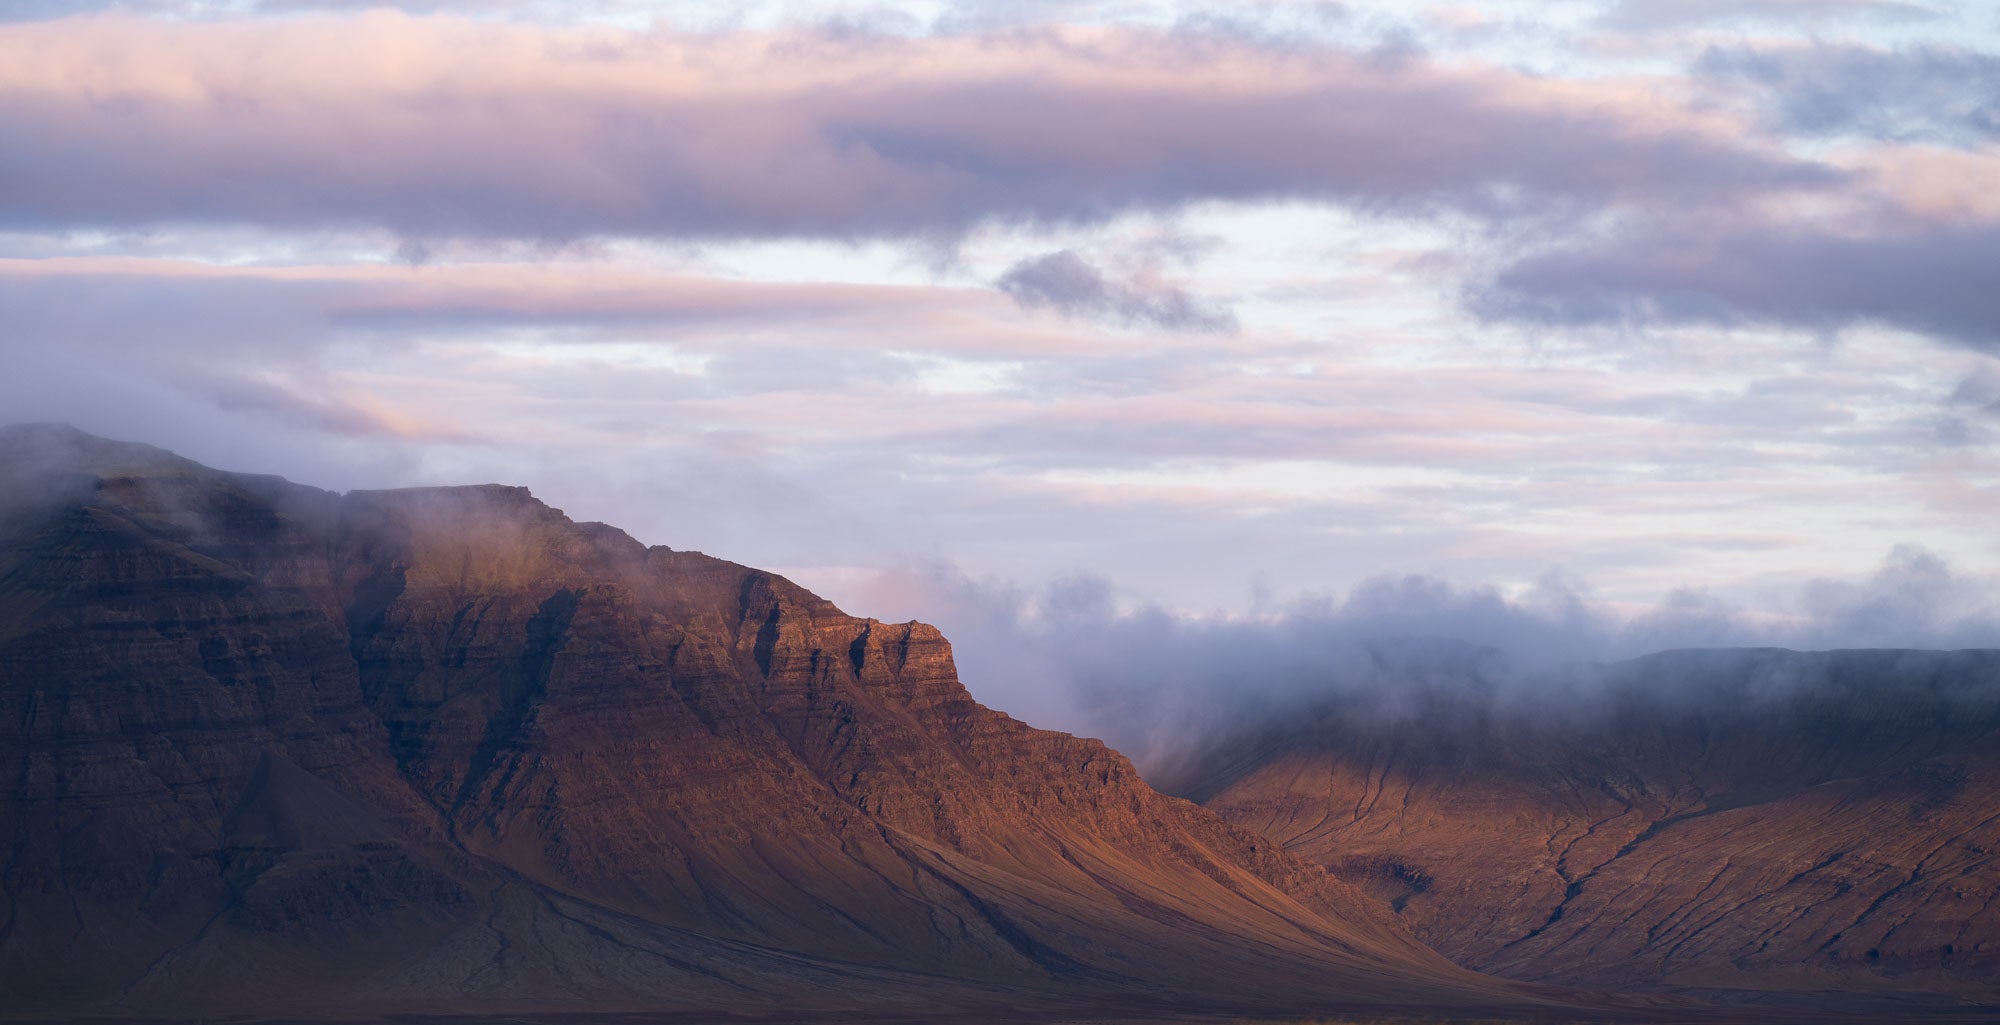 Late evening light bathes the Snæfellsnes Peninsula mountains in a warm glow with pink-tinged clouds above in Iceland.